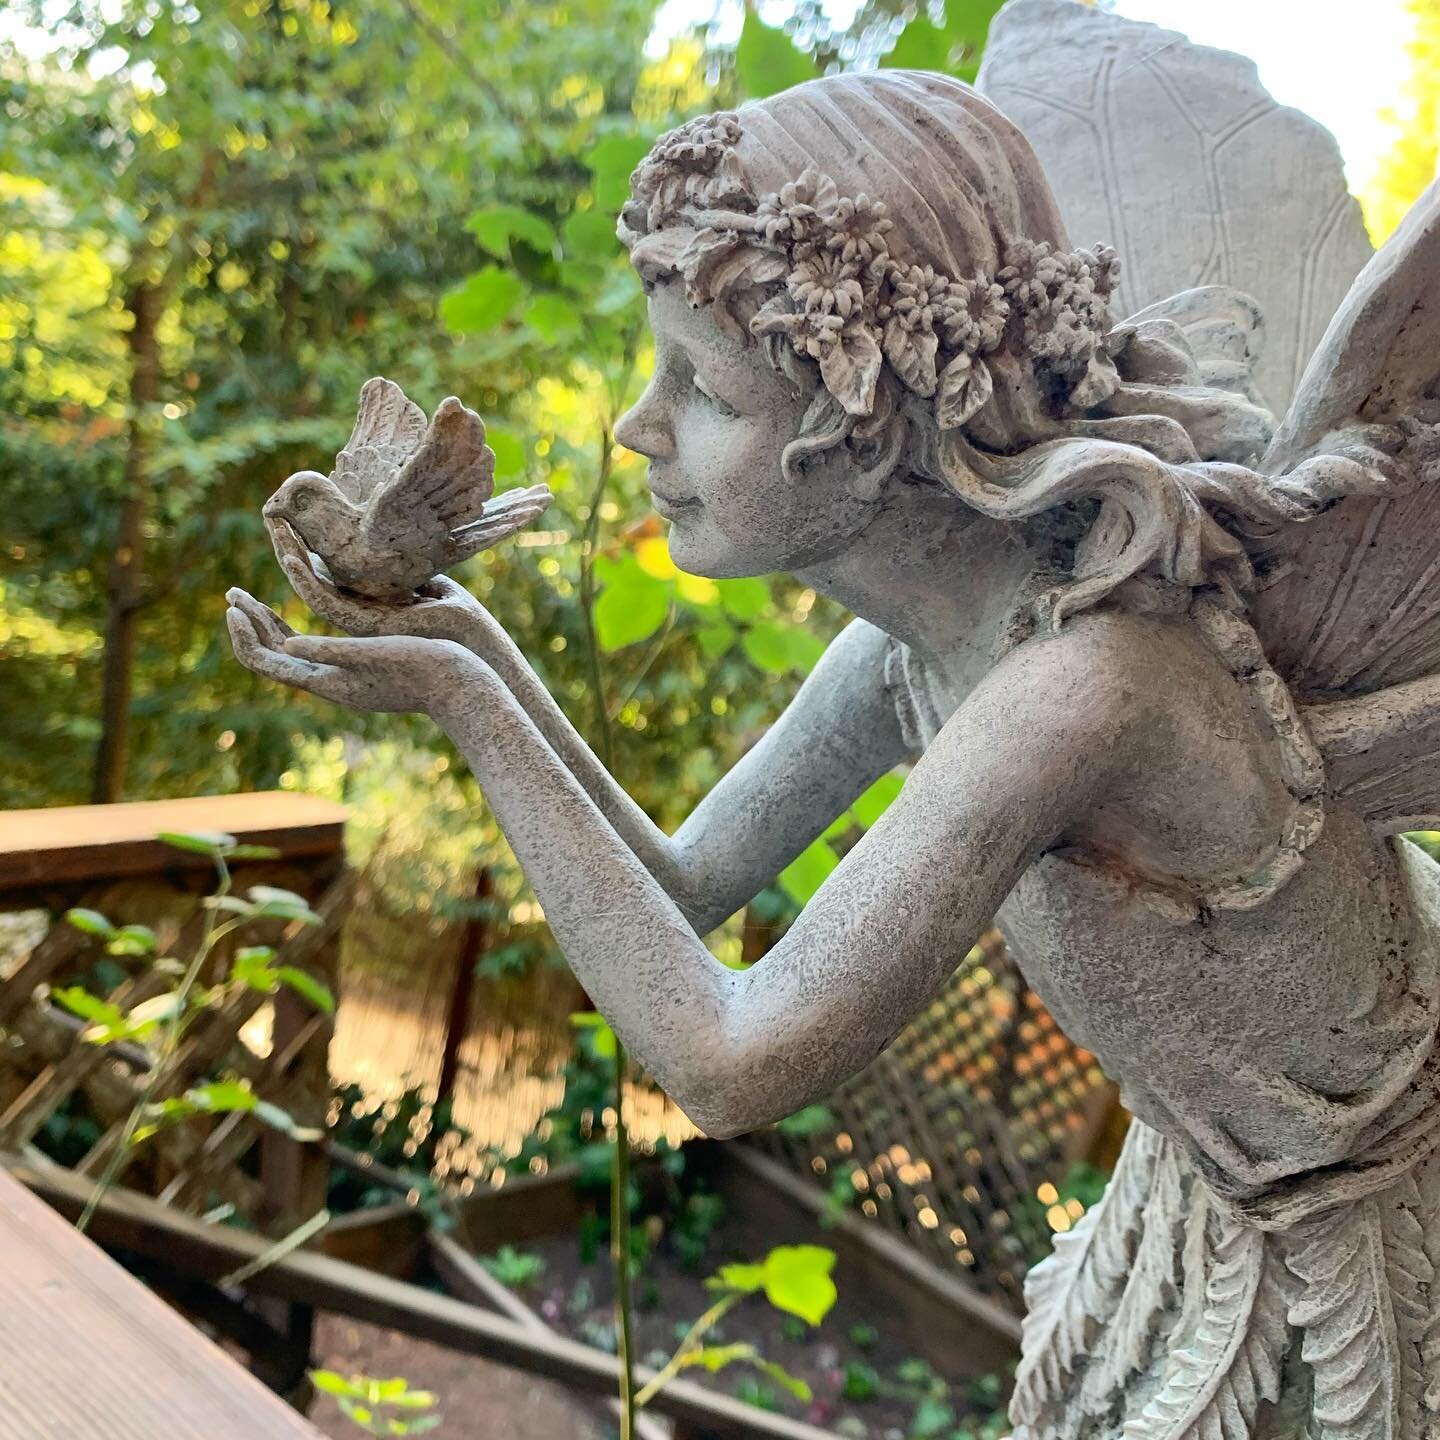 Fairies love nature and find beauty in all its creatures. #howtoknowyouareafairy #fairywingsforall 🧚&zwj;♀️✨